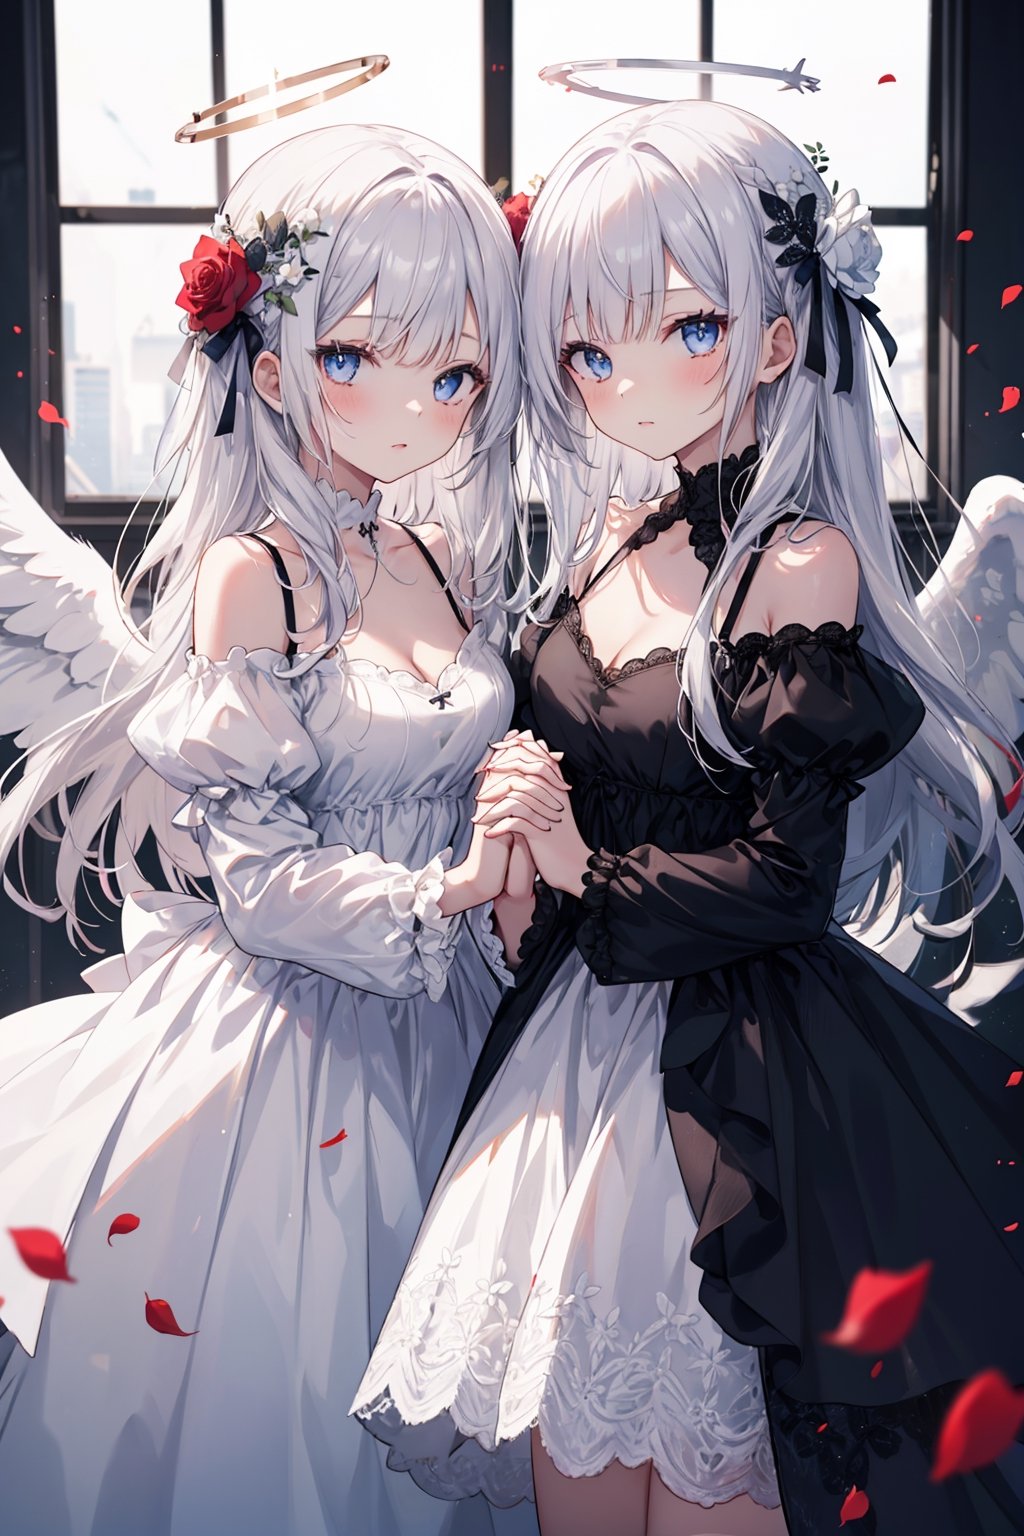 masterpiece, best quality, ultra-detailed, extremely detailed, depth of field, ((2girl, twins)), white_angel with white further wing and white halo, black_angel with black further wing and dark halo, cowboy shot,cleavage,off shoulder,hair flower, off-shoulder dress, puffy long sleeves, puffy sleeves, rose petals, Heterochromatic pupil, cloud, sky, ((holding hands))
